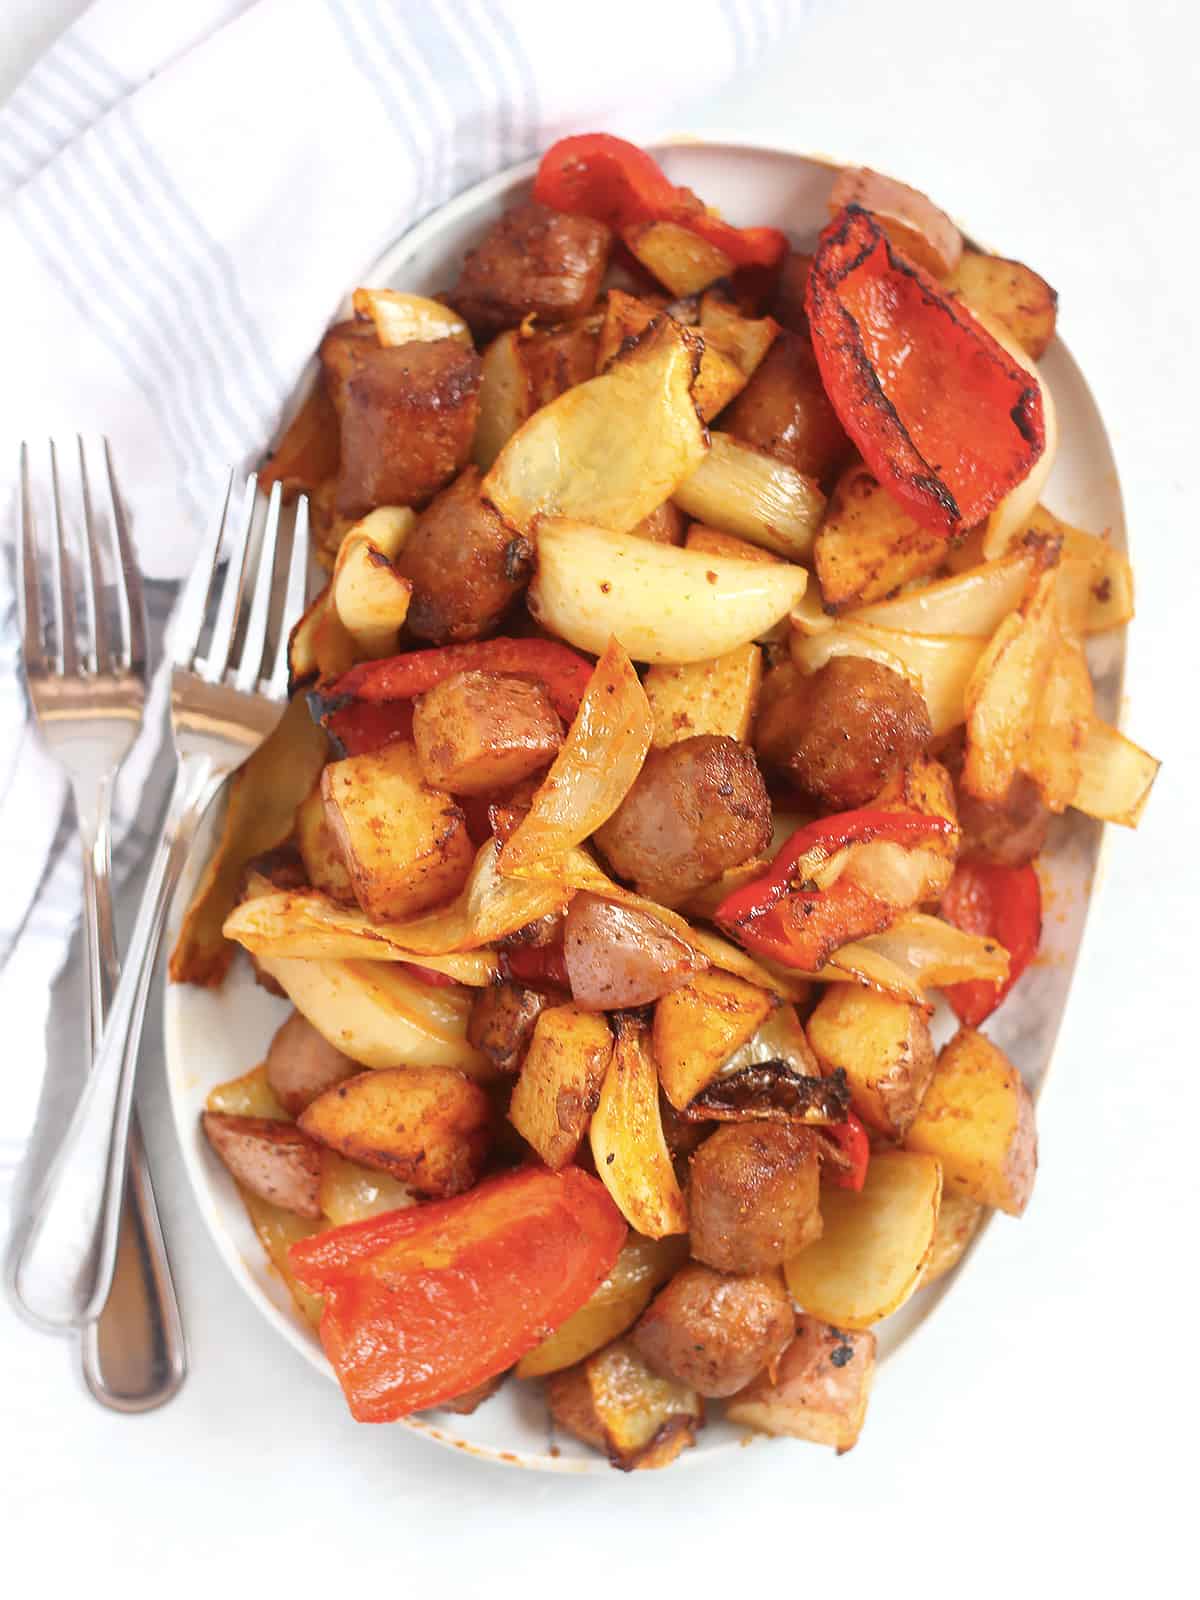 Air fryer sausage, peppers, onions and potatoes on a serving plate next to two forks.